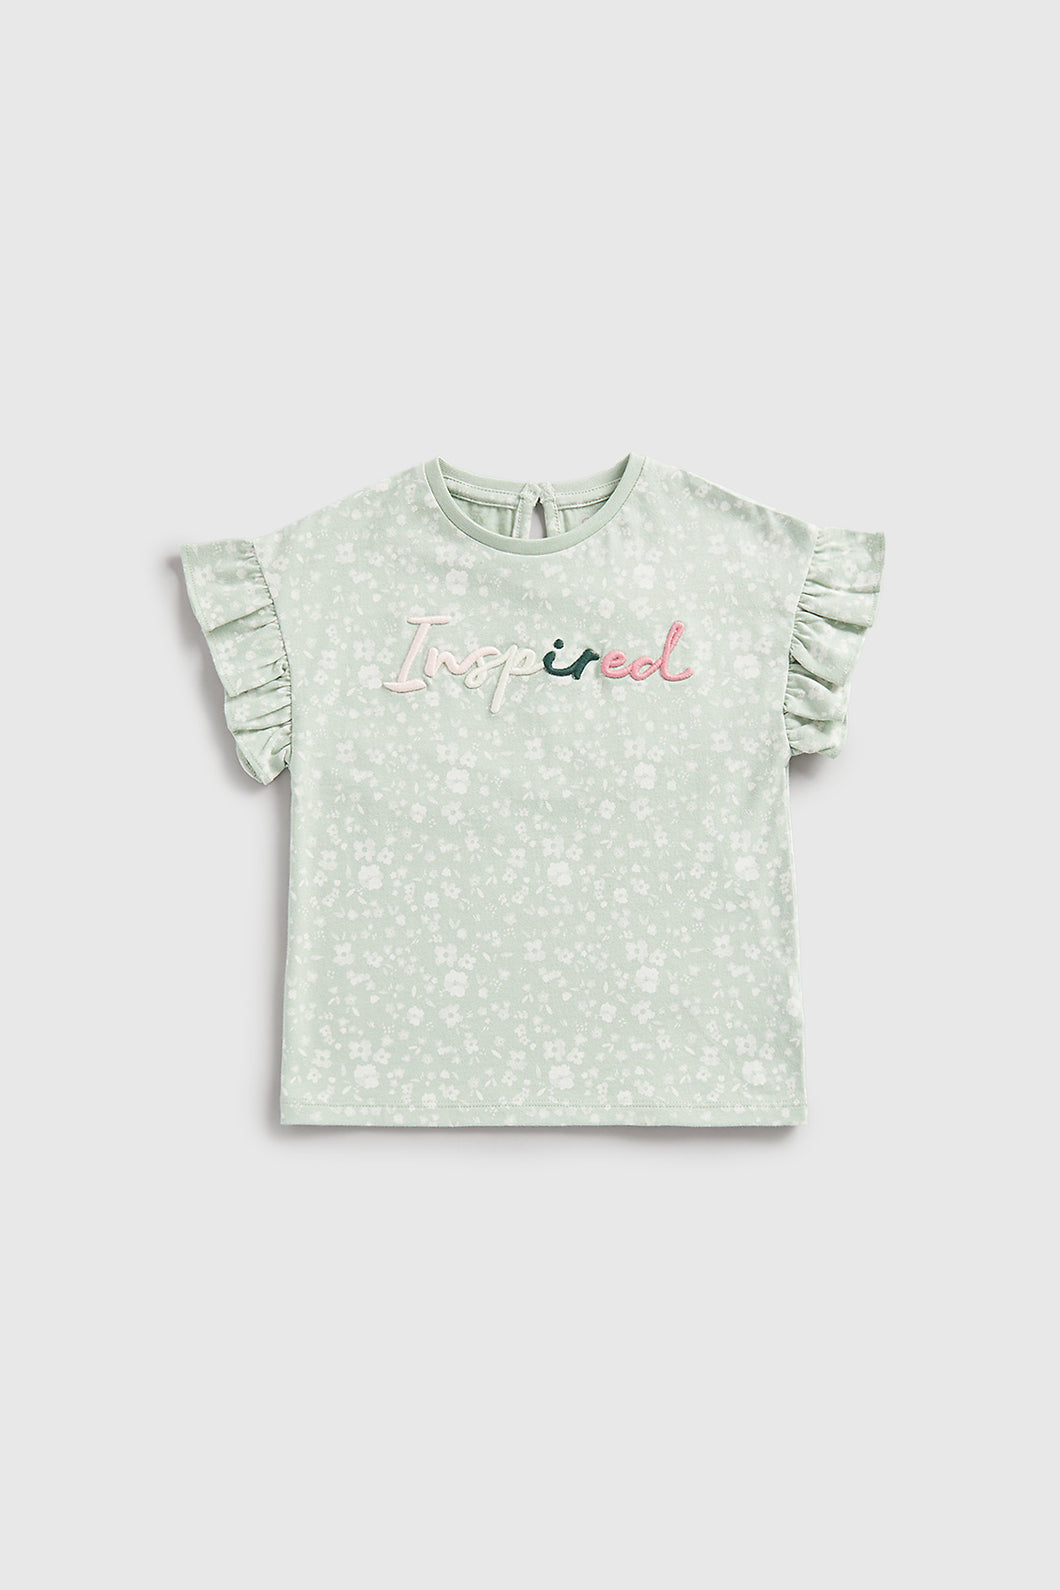 Mothercare Inspired T-Shirt